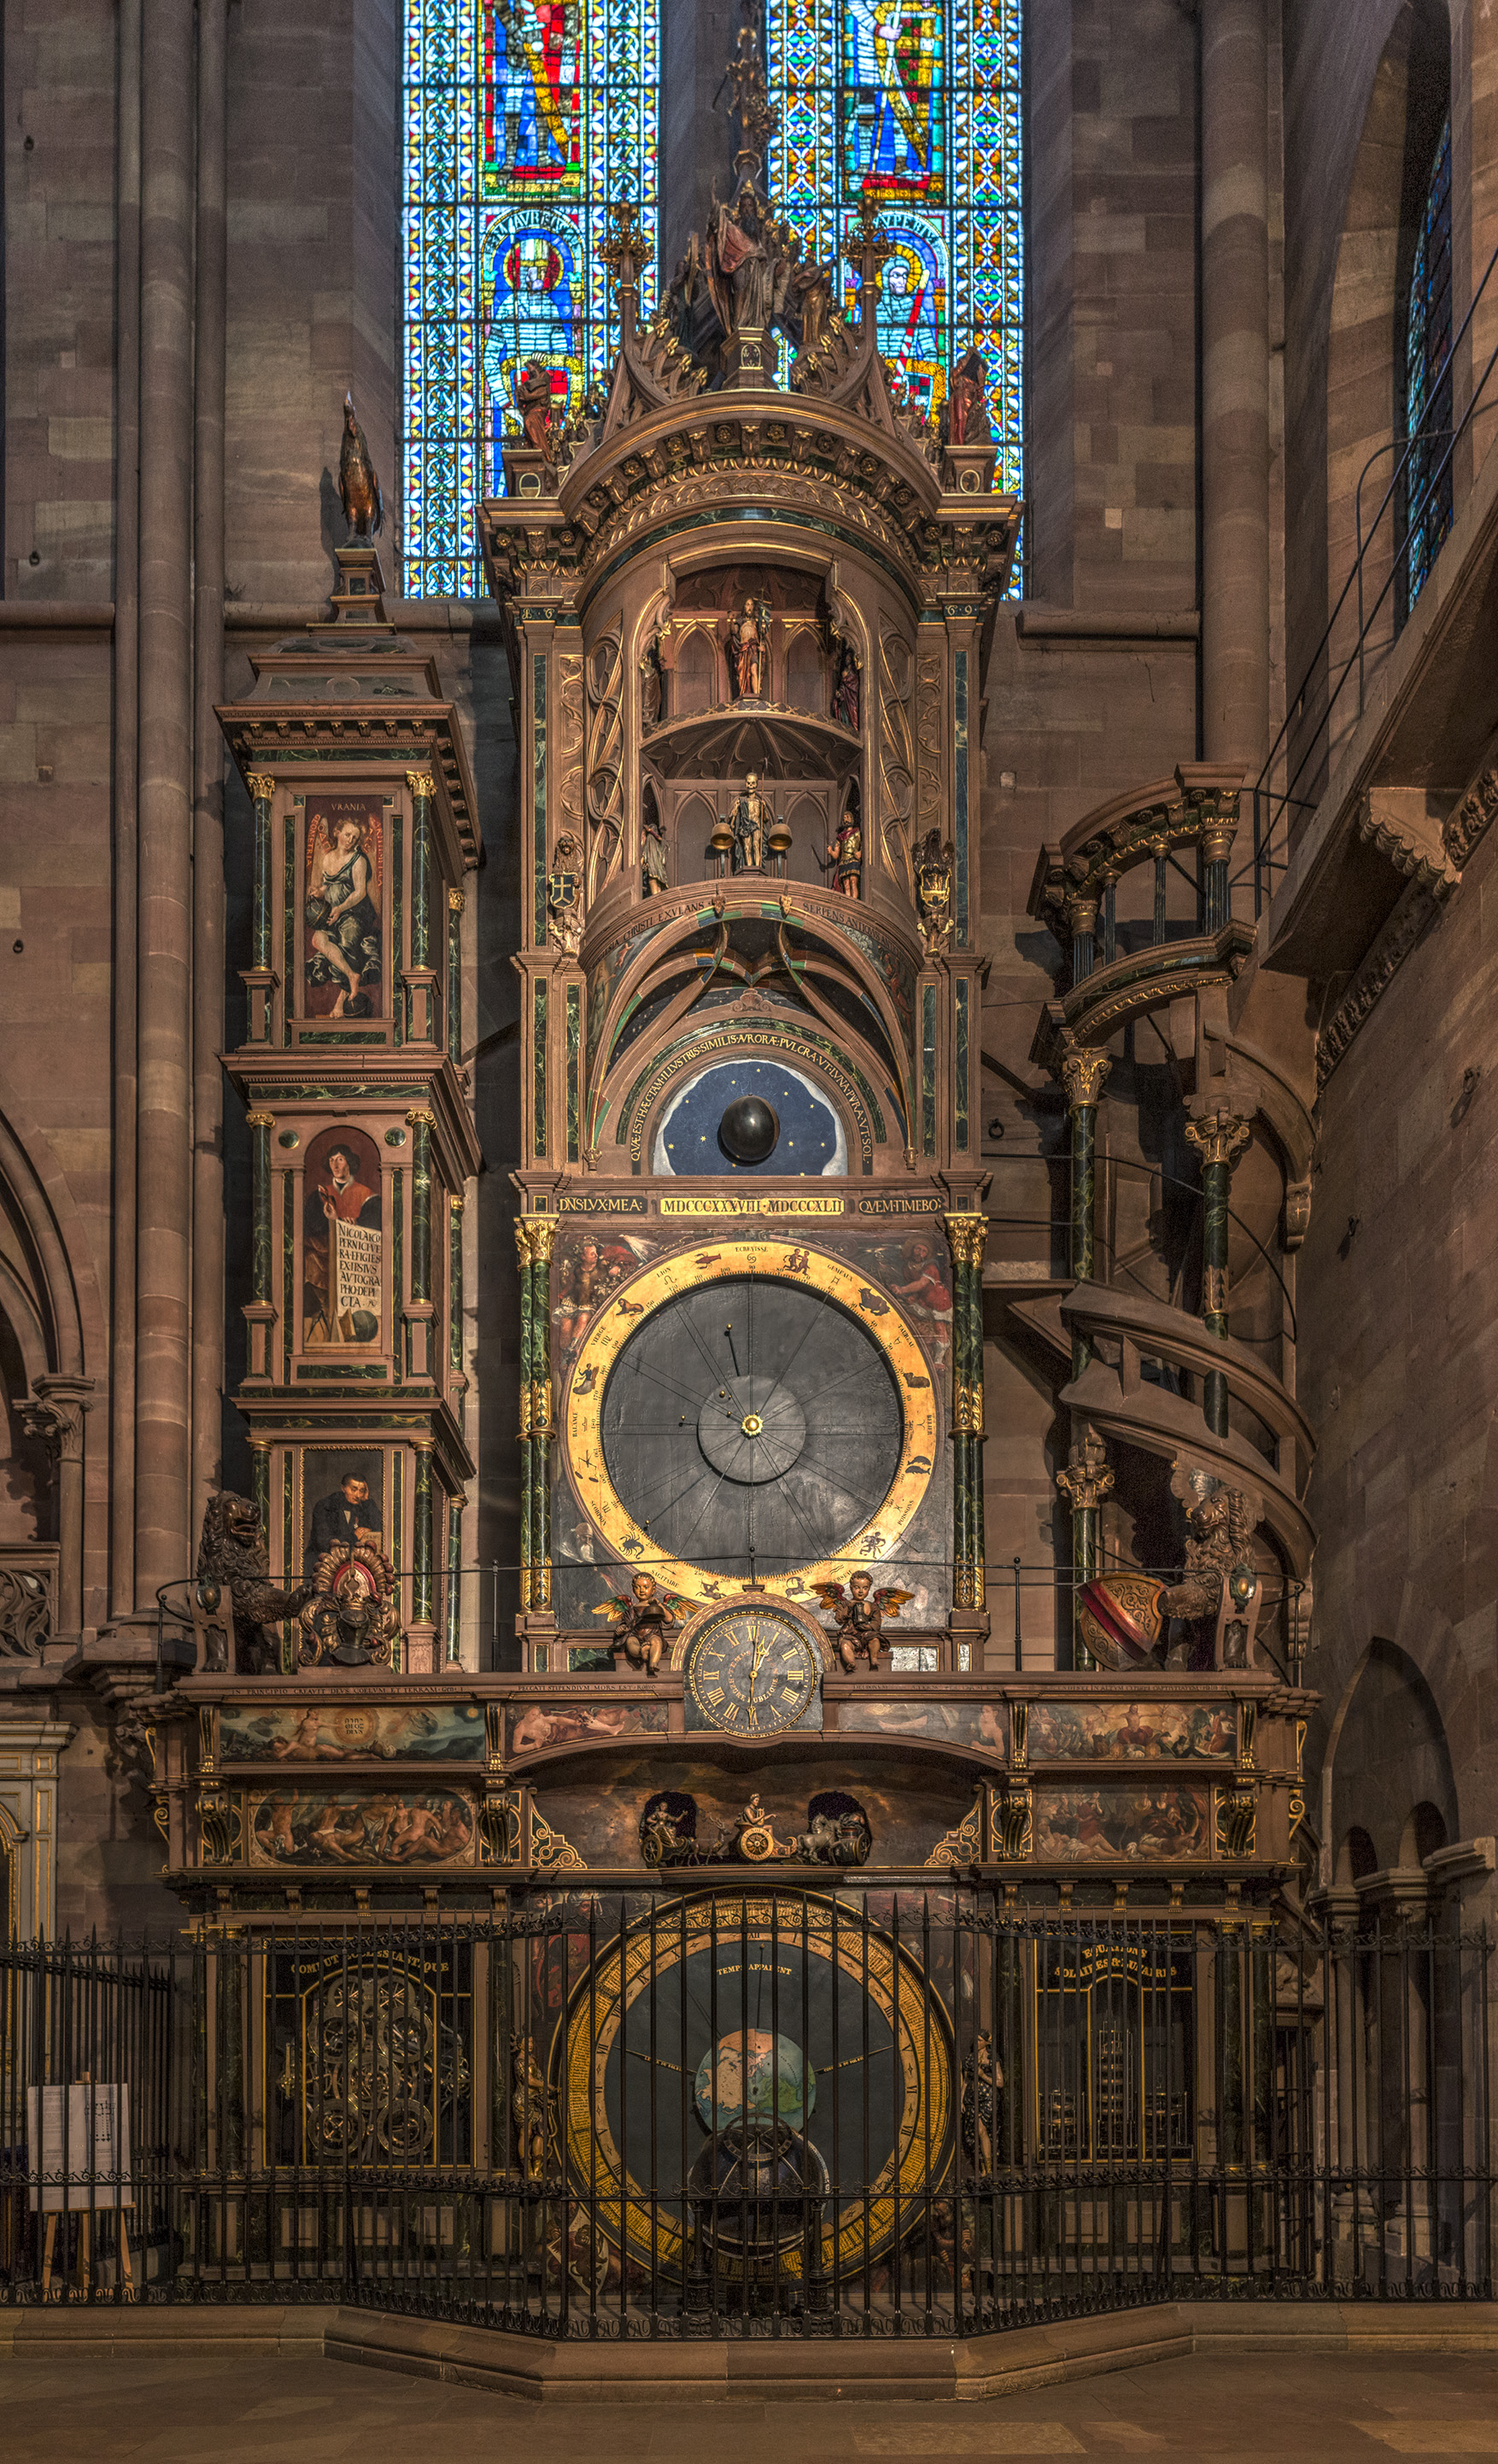 French Hotel Barge Cruises in Alsace-Lorraine France. Strasbourg Cathedral astronomical clock